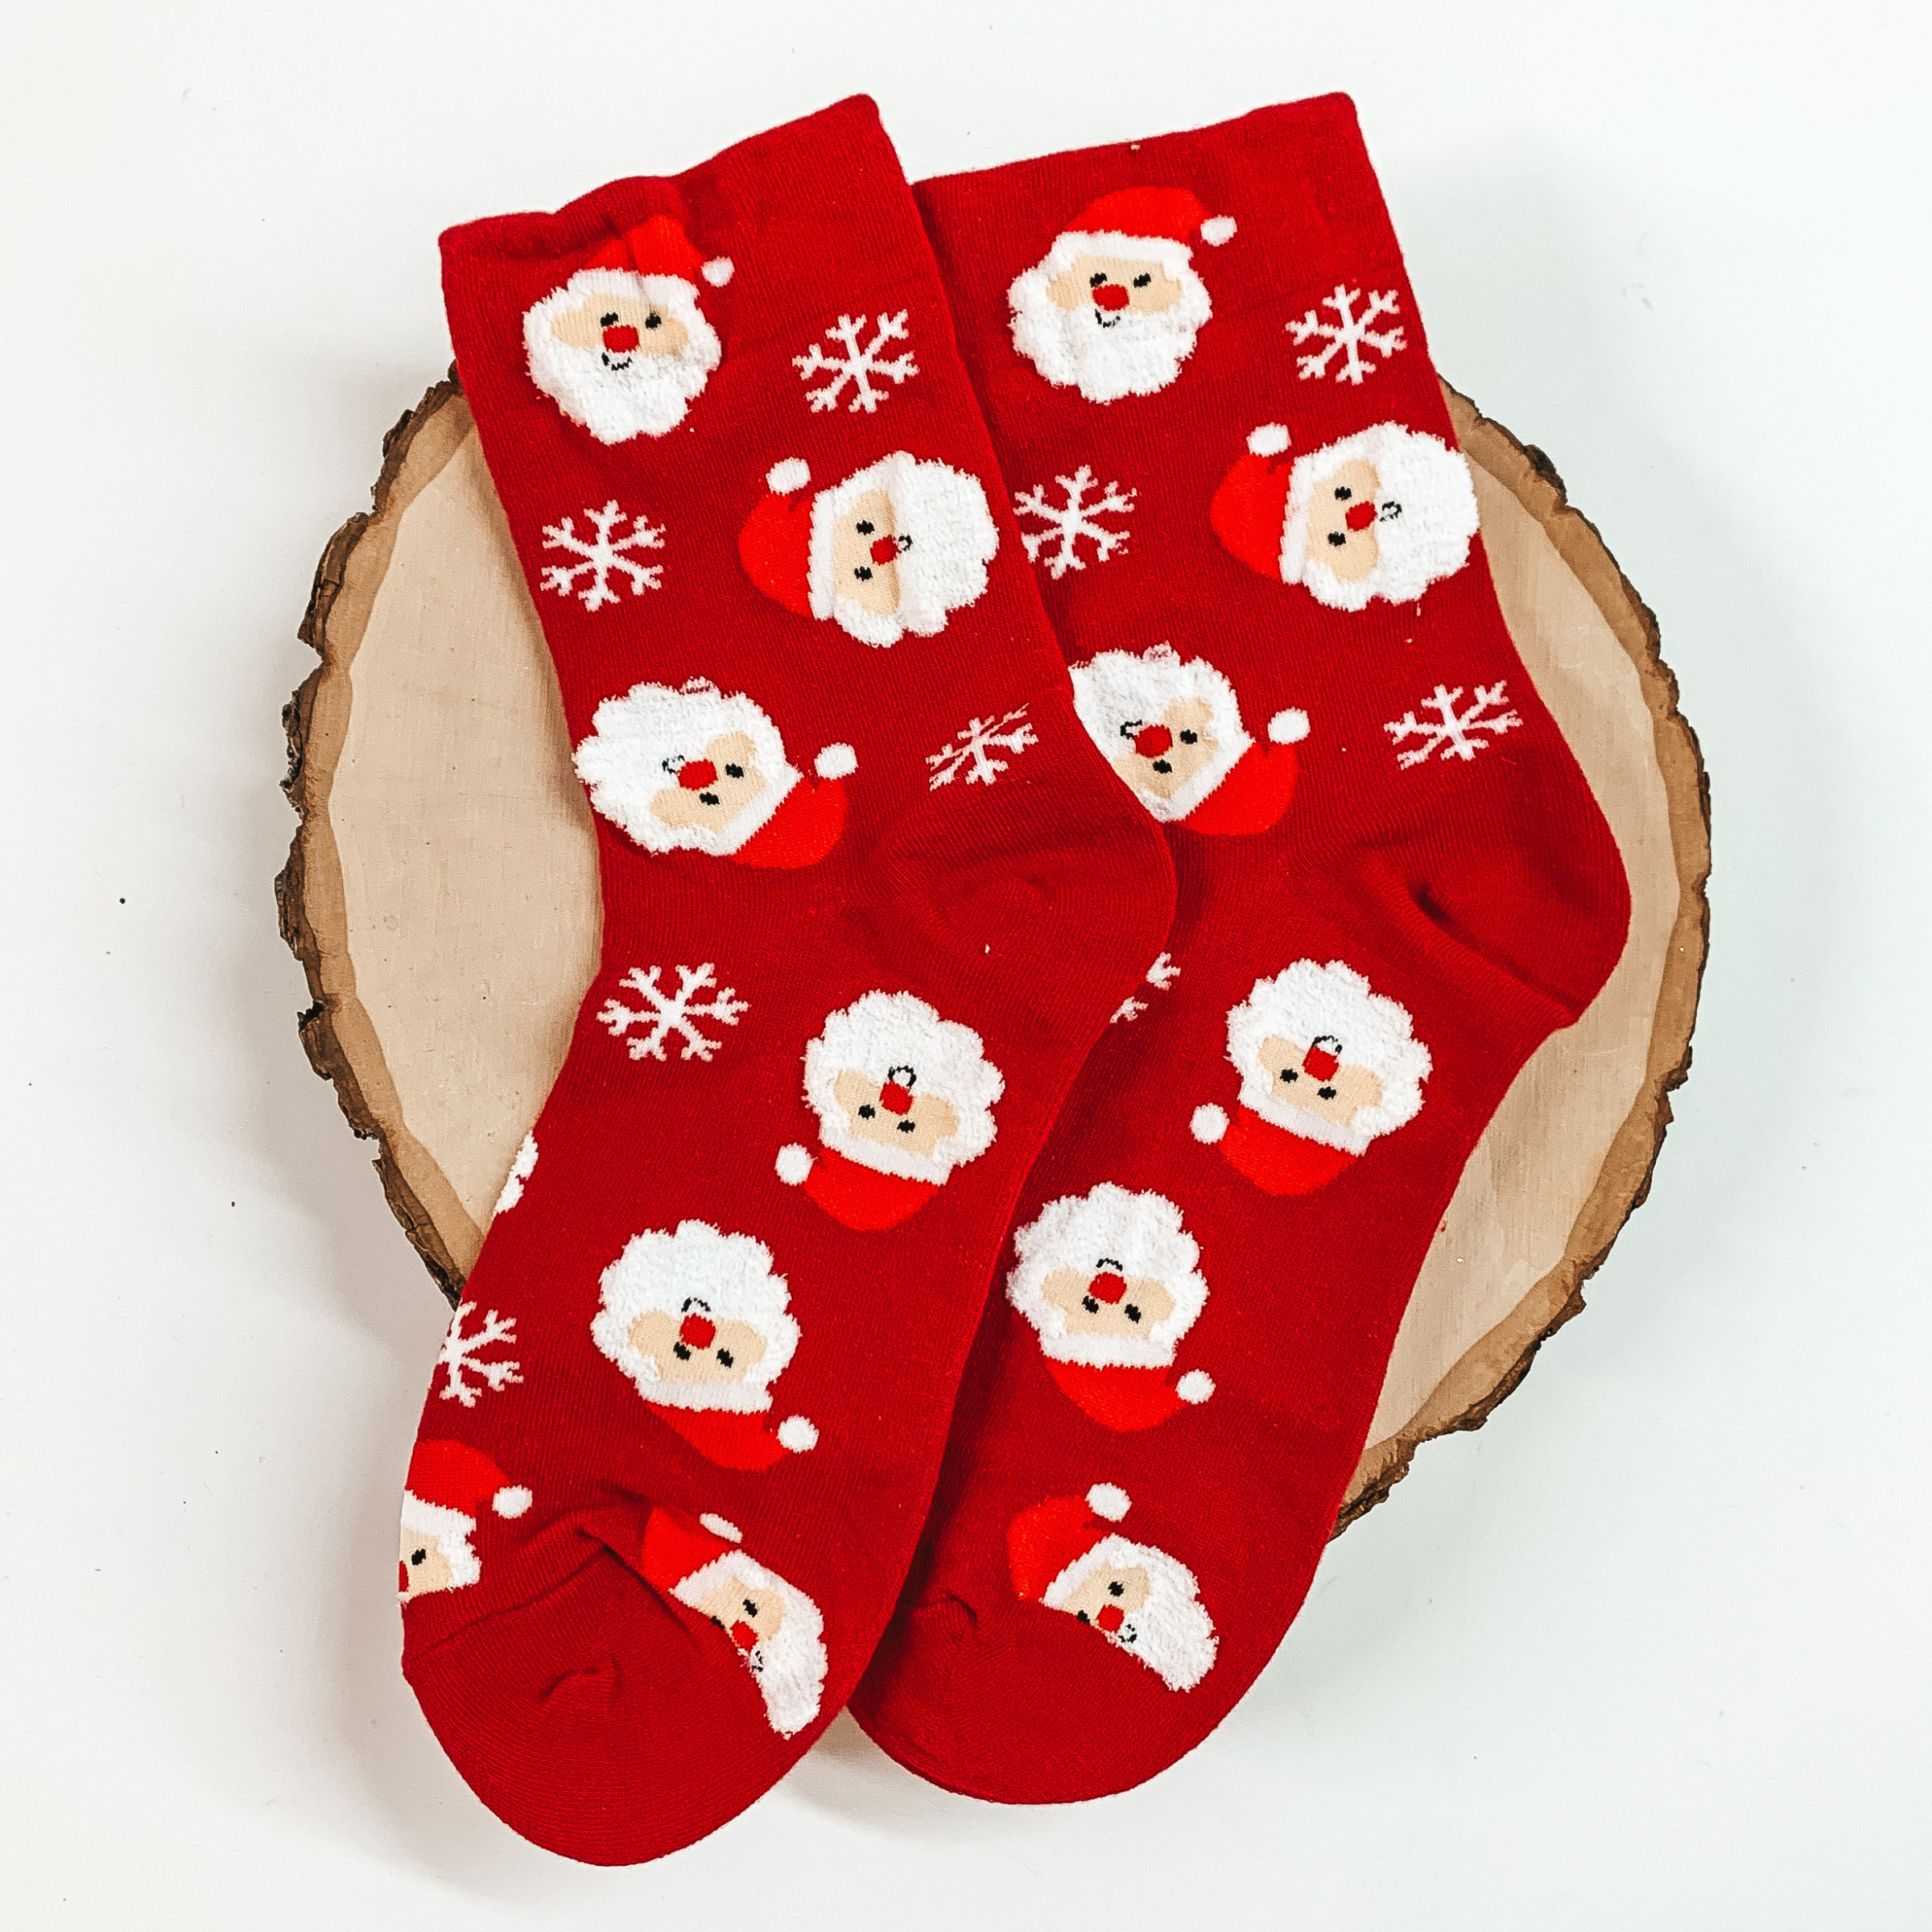 Red ankle socks with a santa claus head and snowflake design. These socks are pictured on a piece of wood on a white background. 